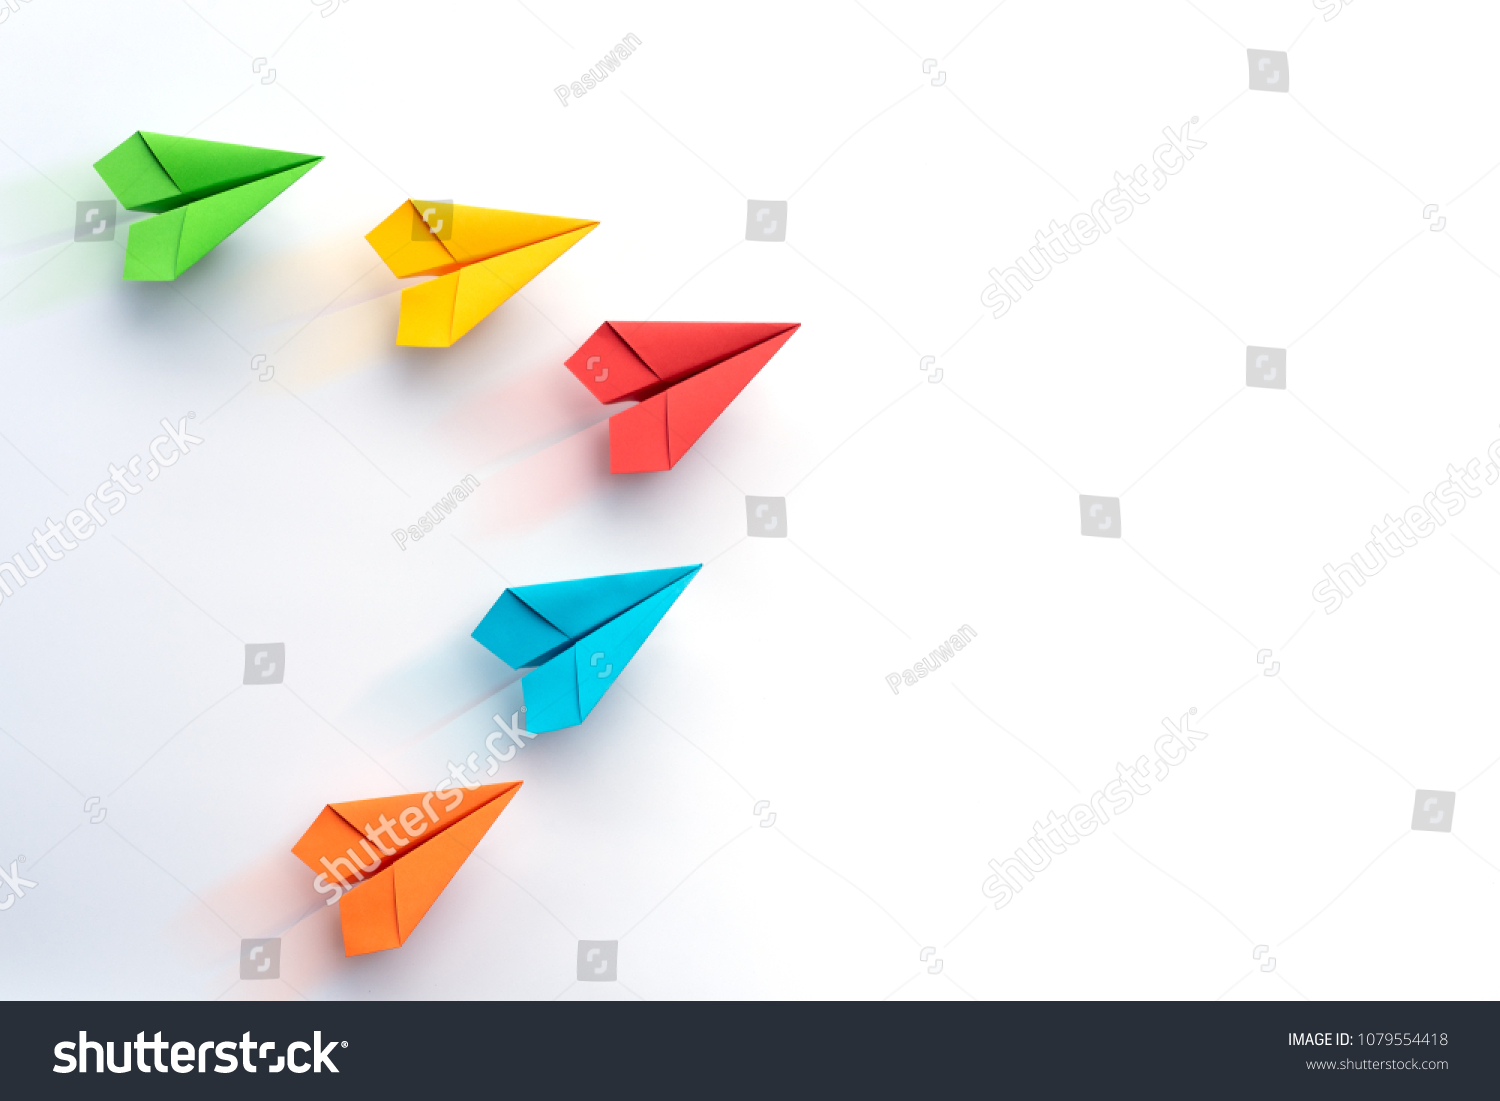 Paper plane on white background. Business competition concept. #1079554418